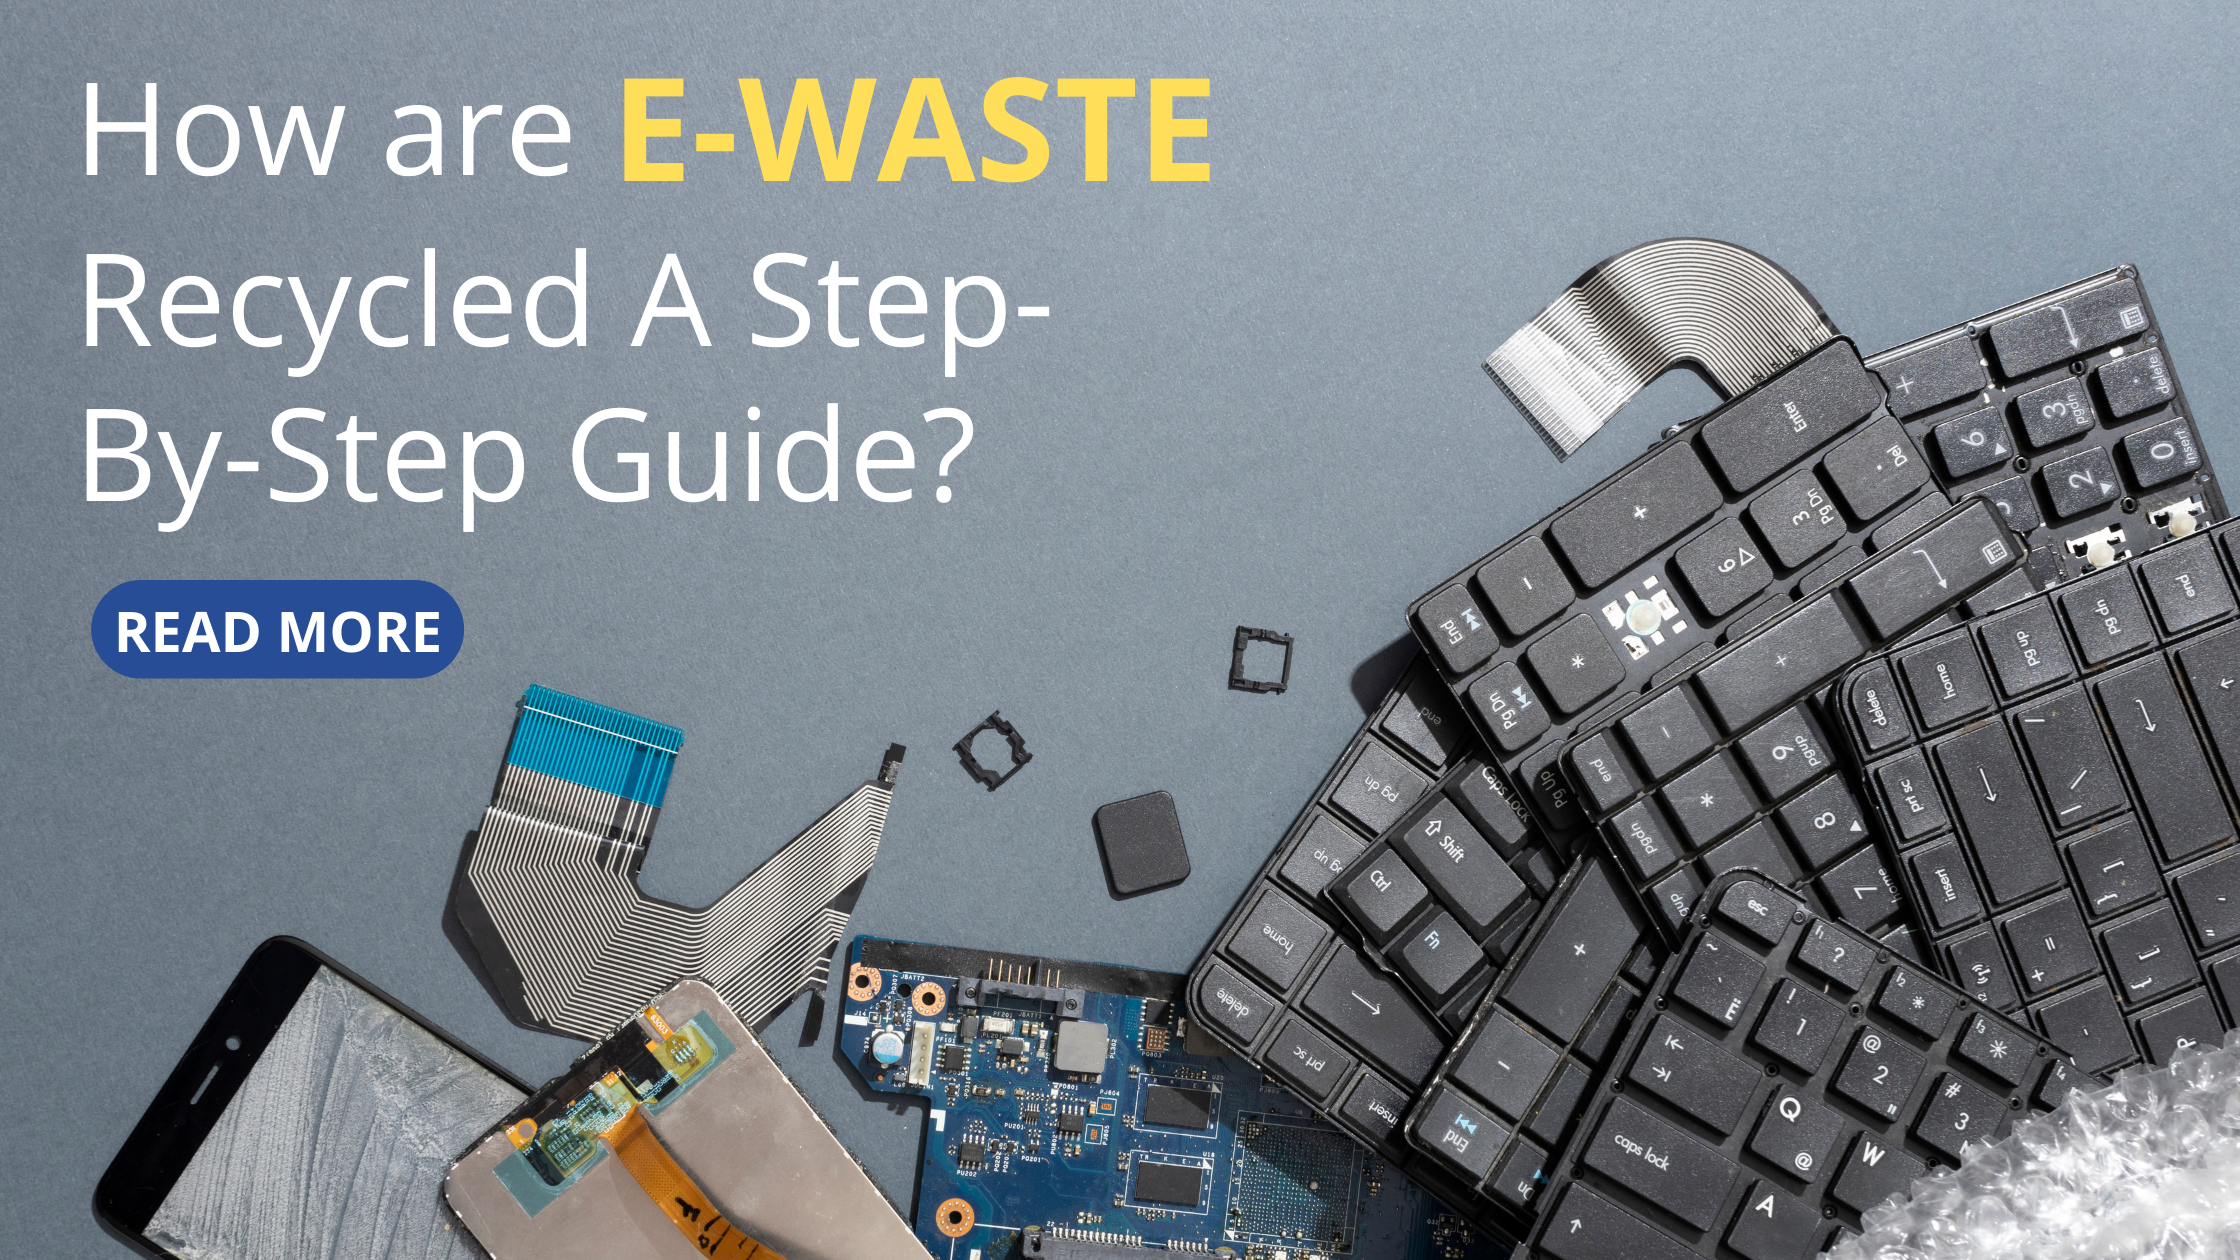 e-Waste Recycling step-by-step